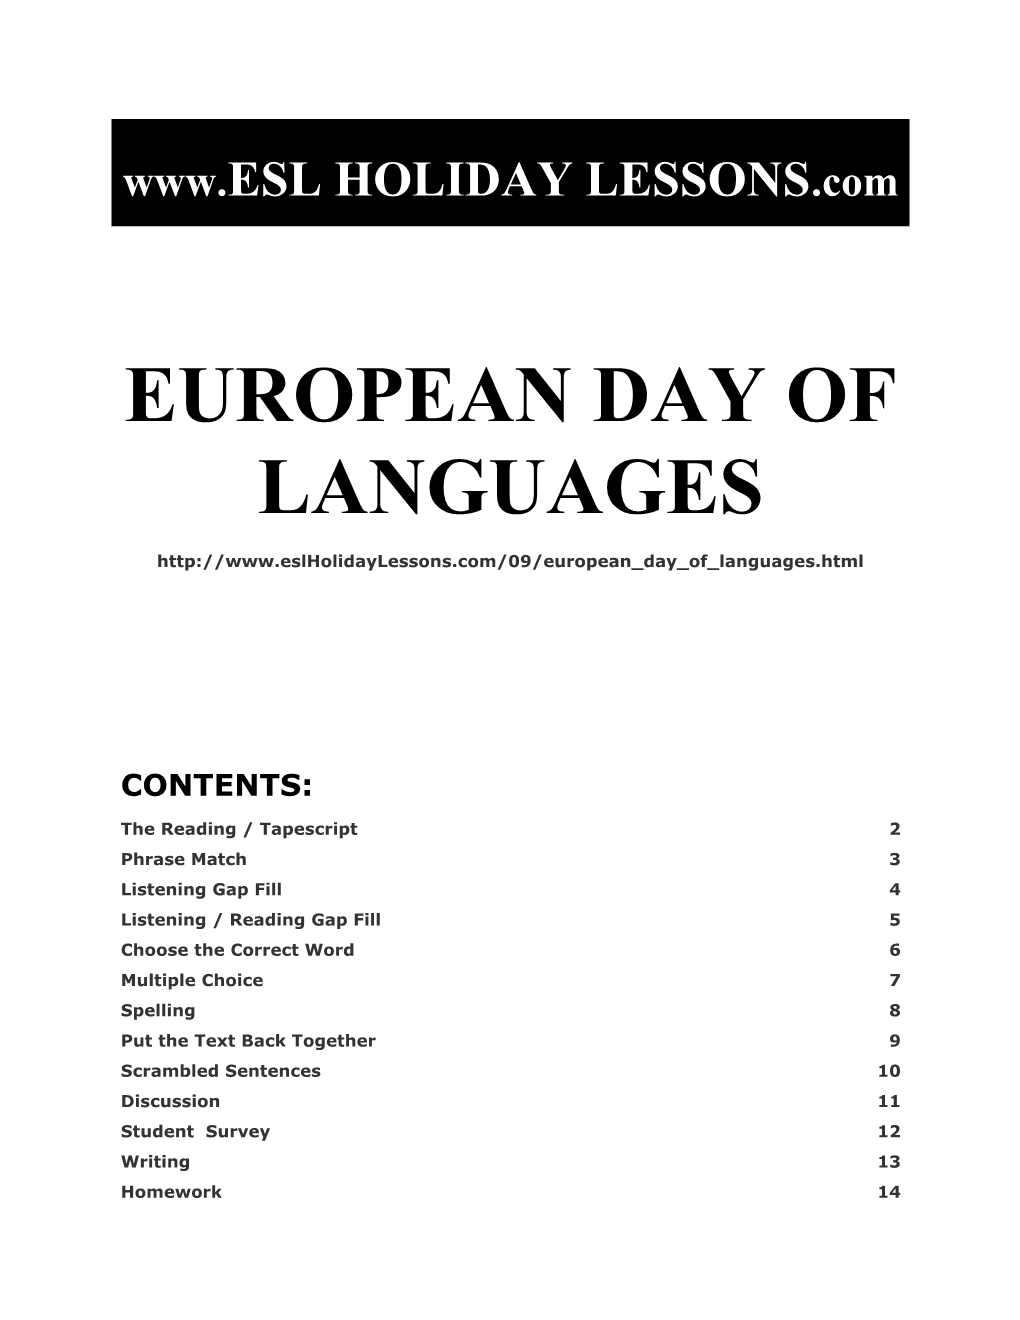 Holiday Lessons - European Day of Languages